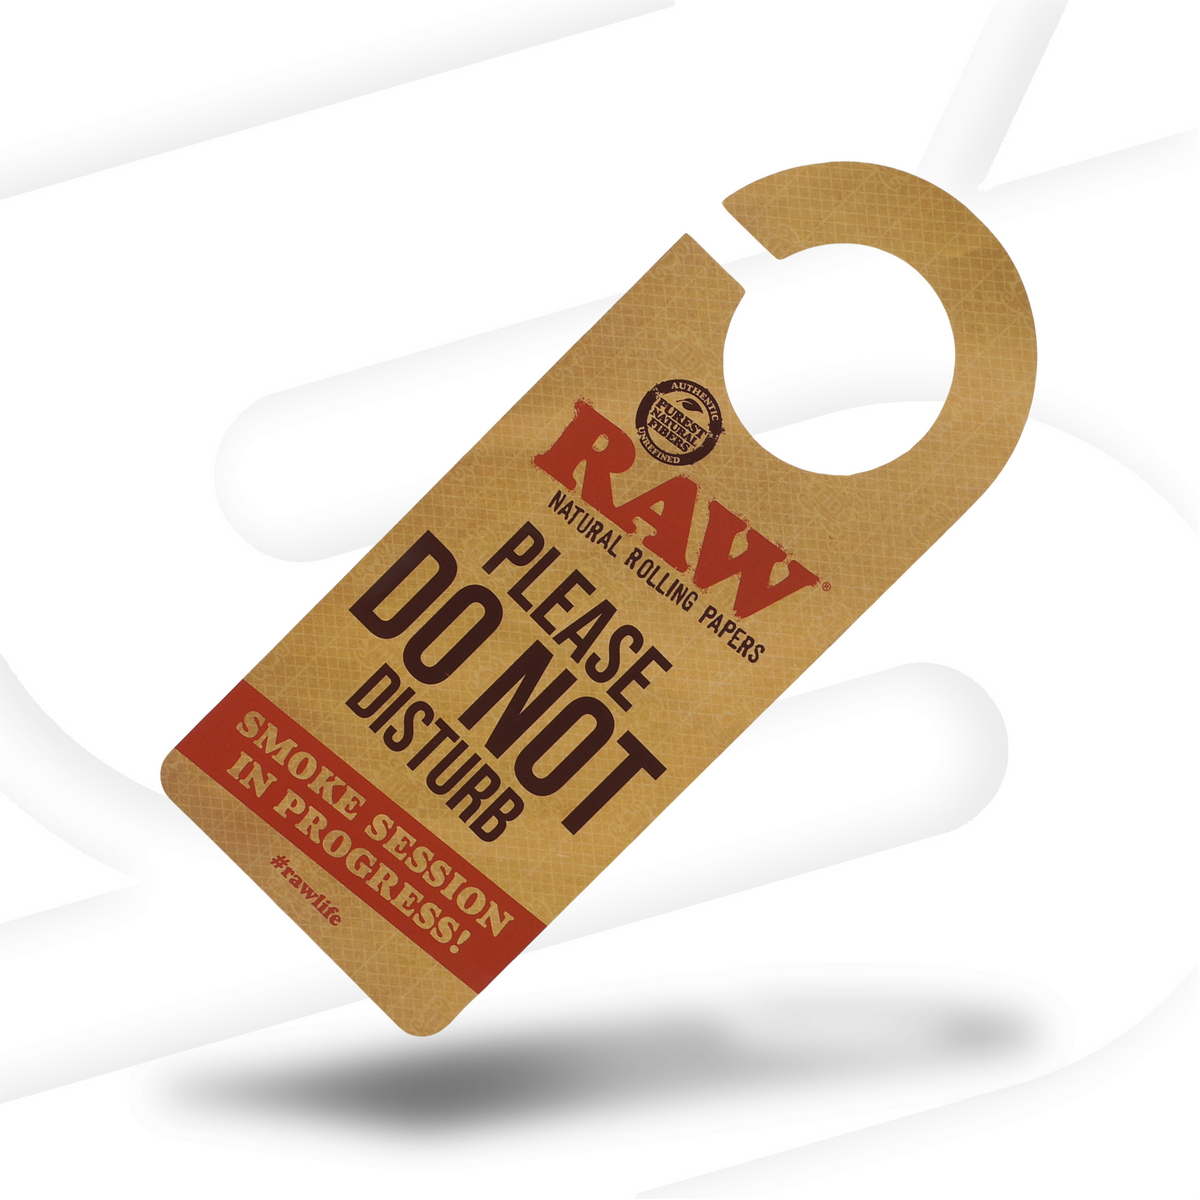 RAW Do Not Disturb Sign Lifestyle WAR00714-MUSA01 esd-official